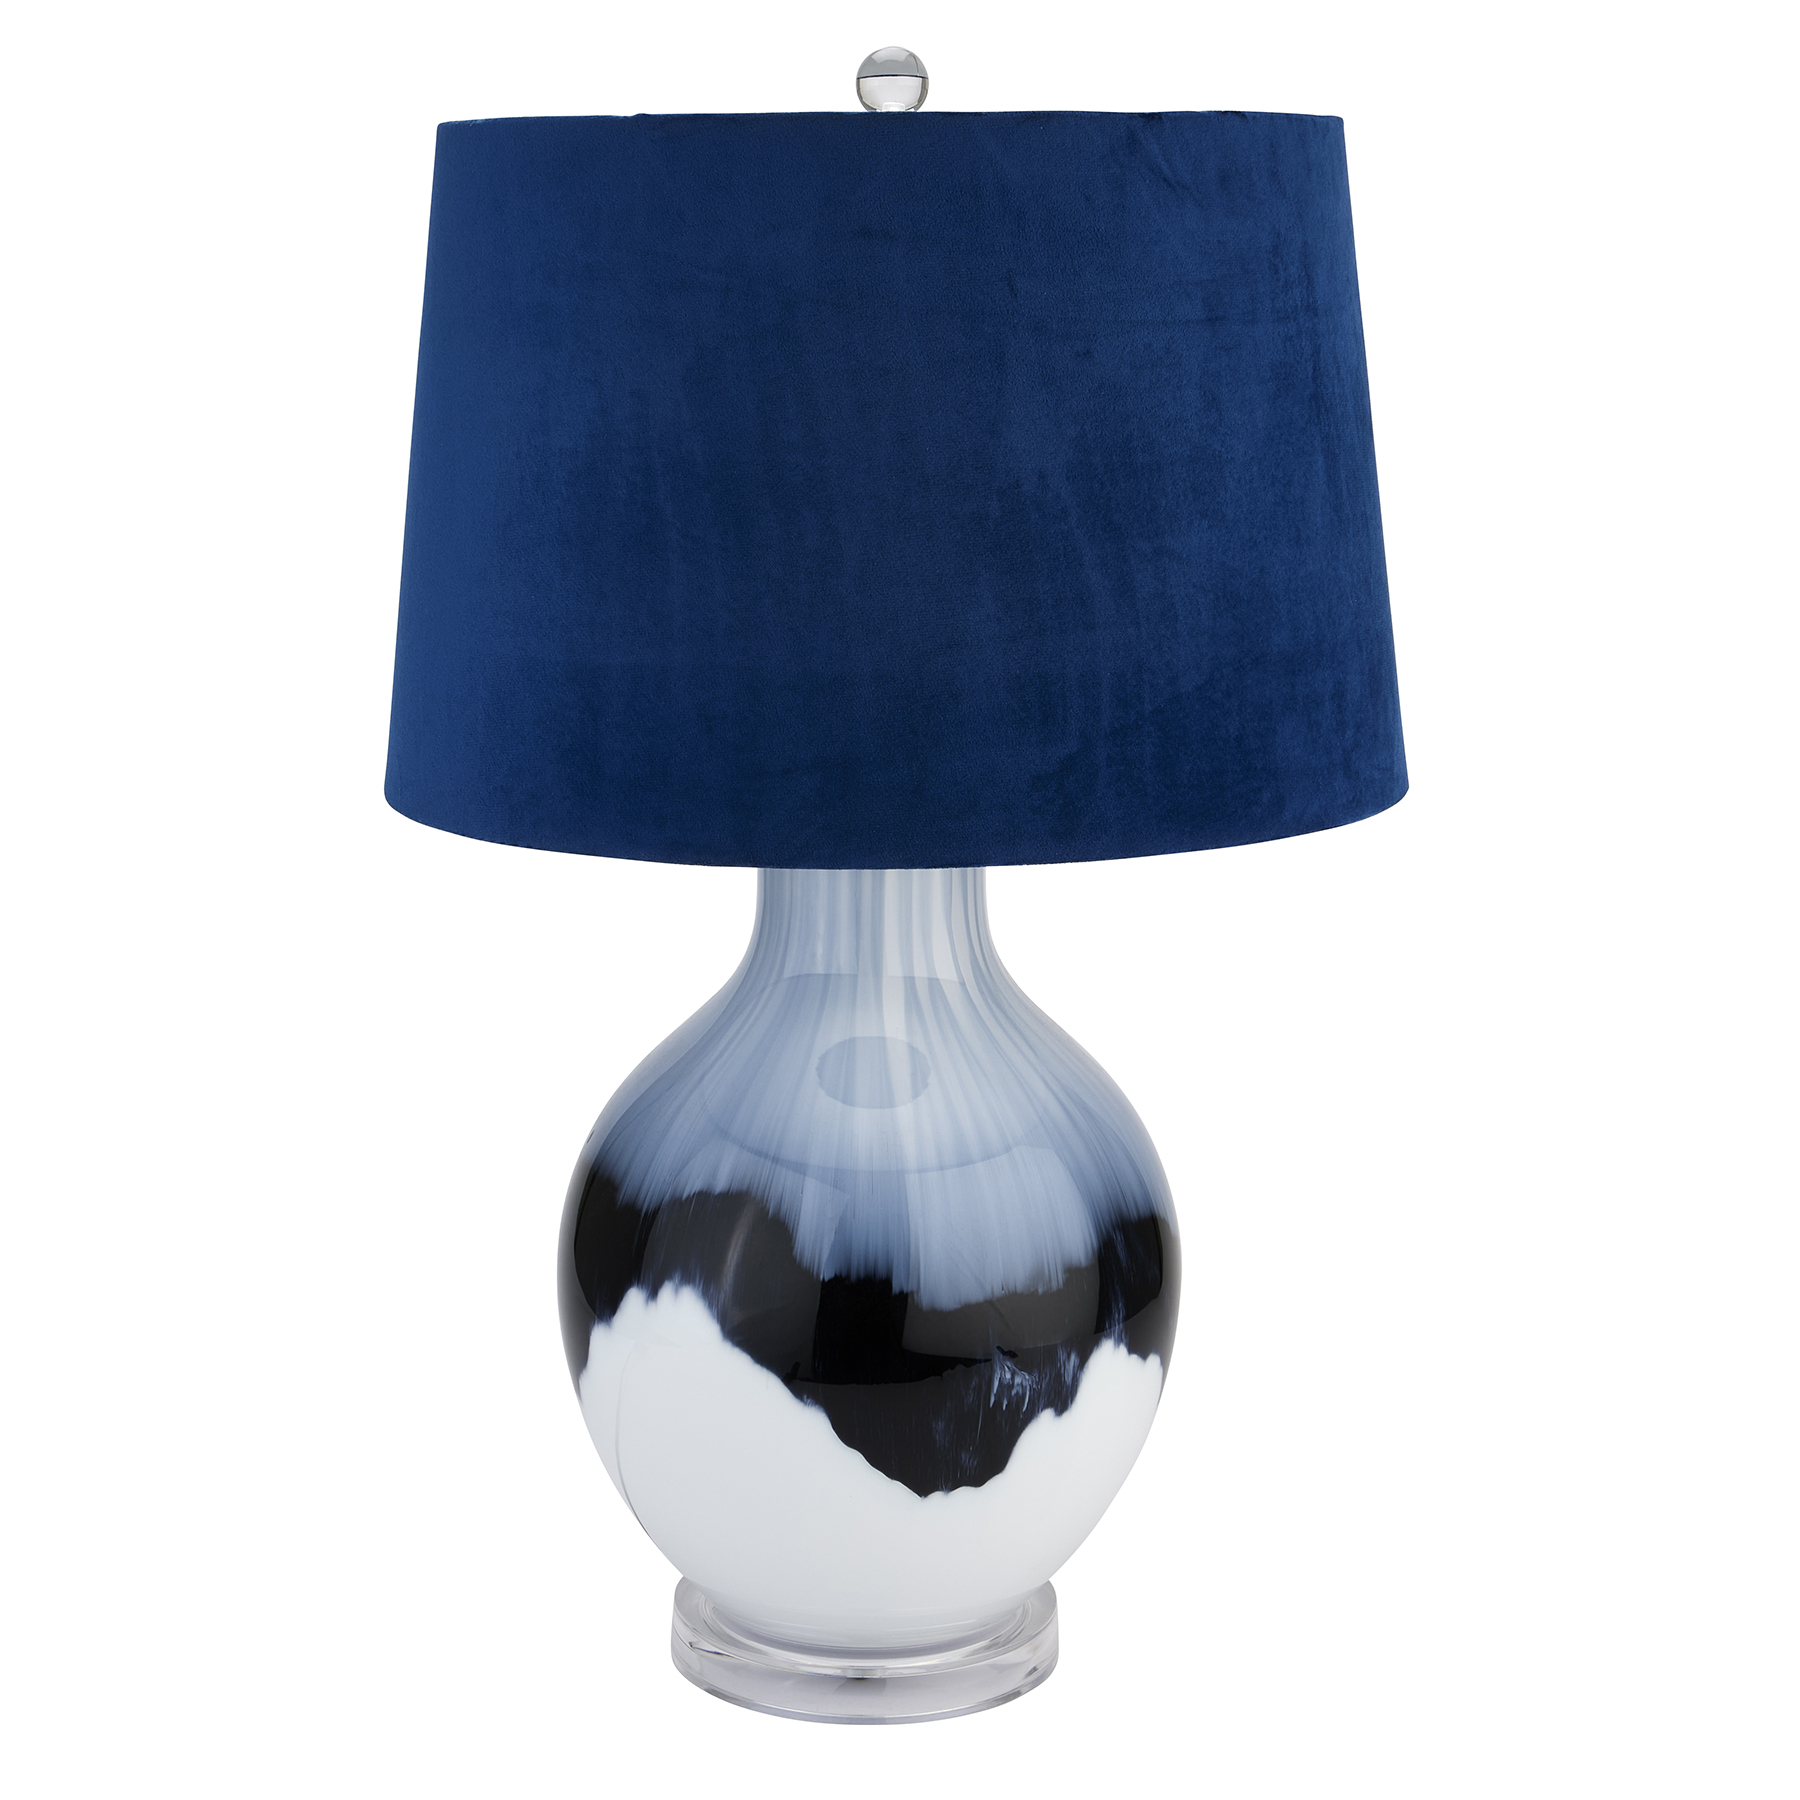 Ice Shadows Table Lamp With Navy Blue Lampshade - Image 1